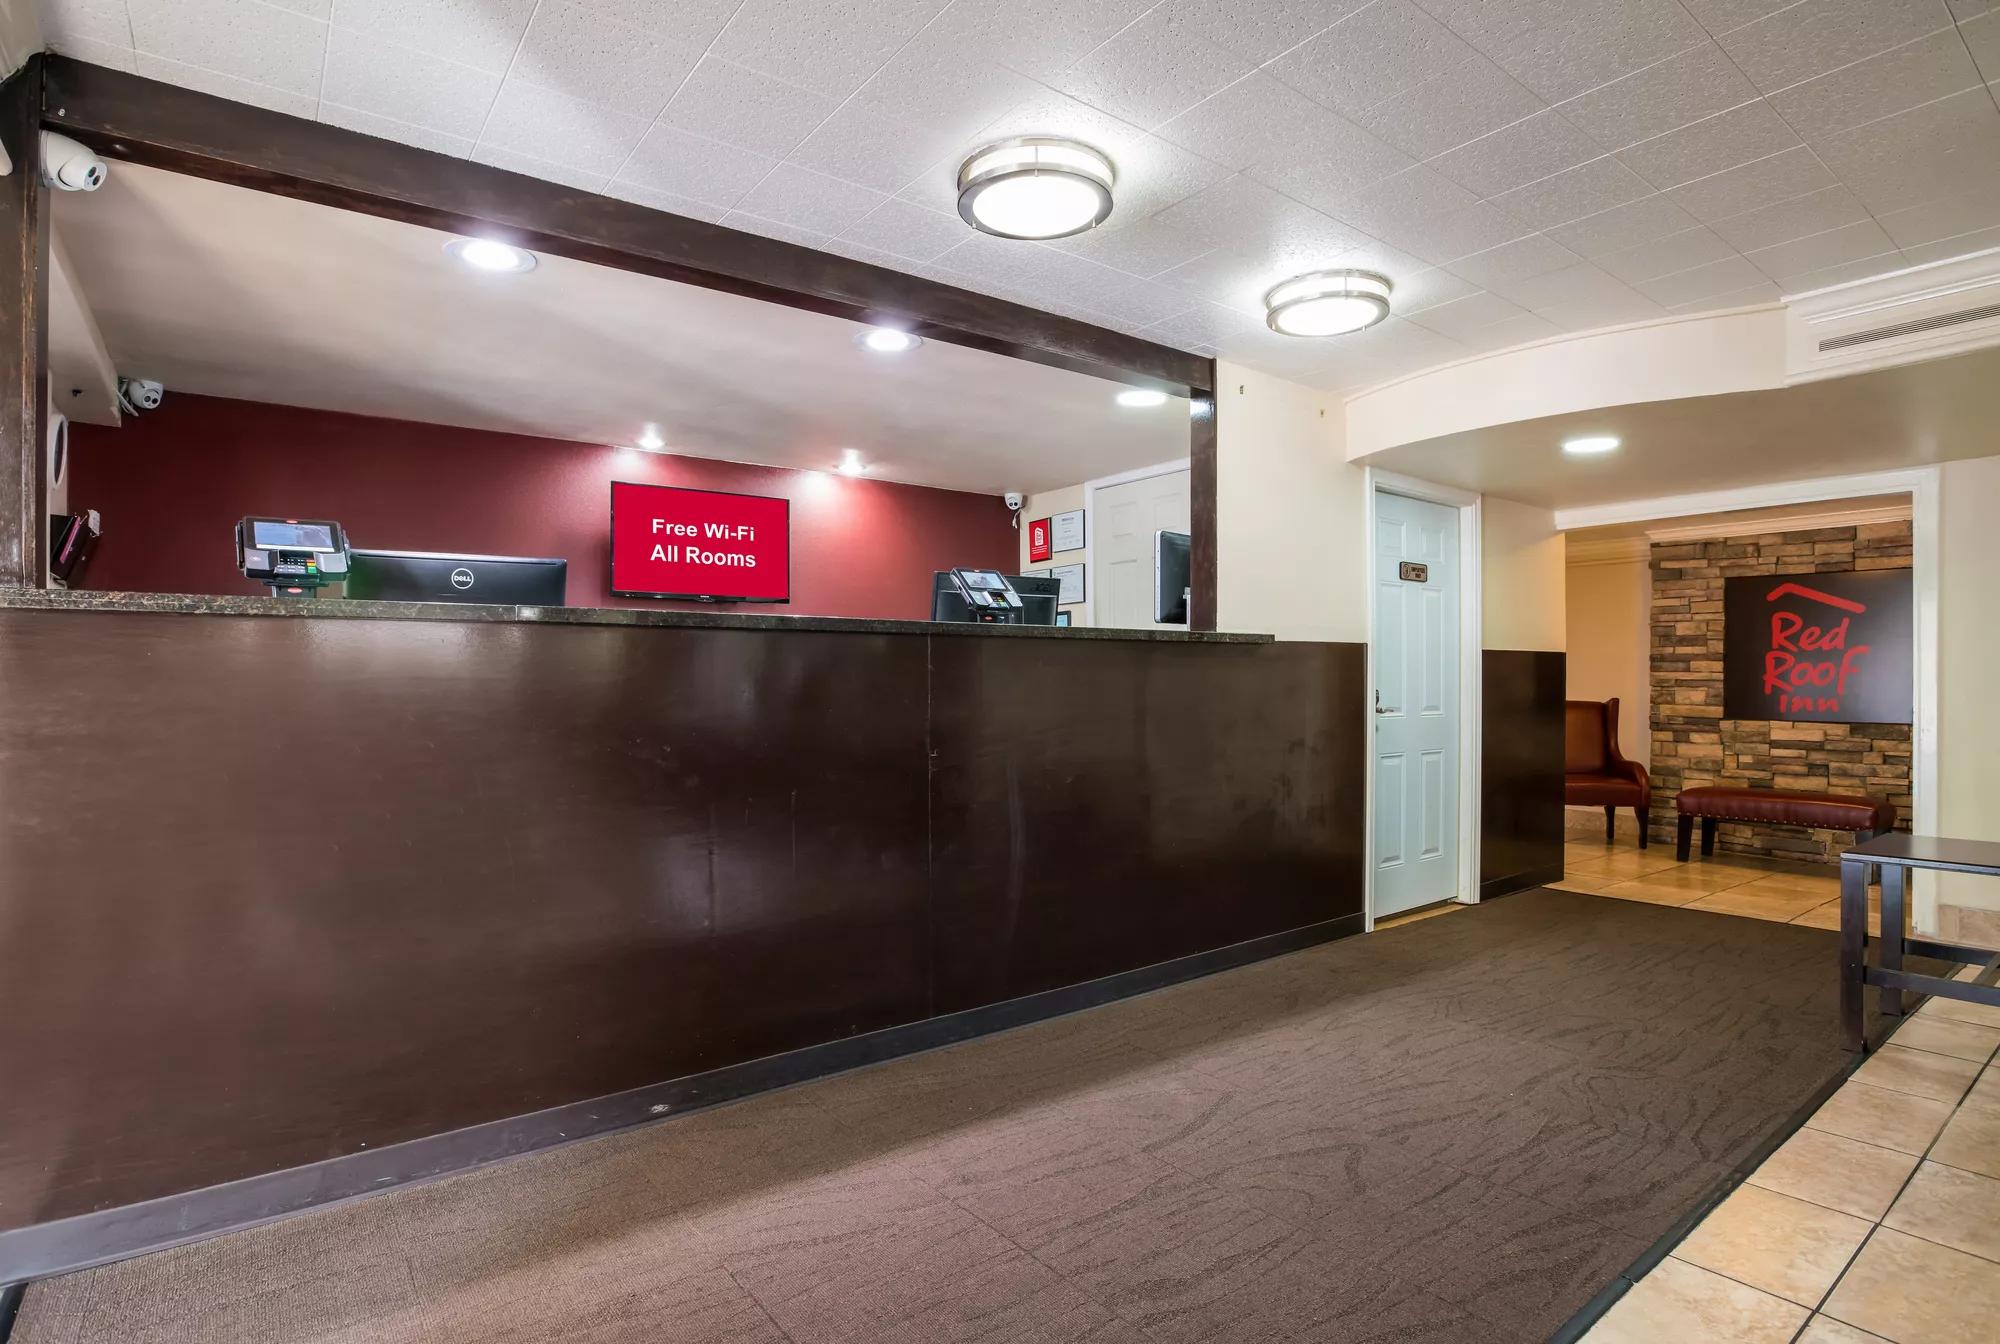 Red Roof Inn Dallas - Richardson Front Desk and Lobby Image 